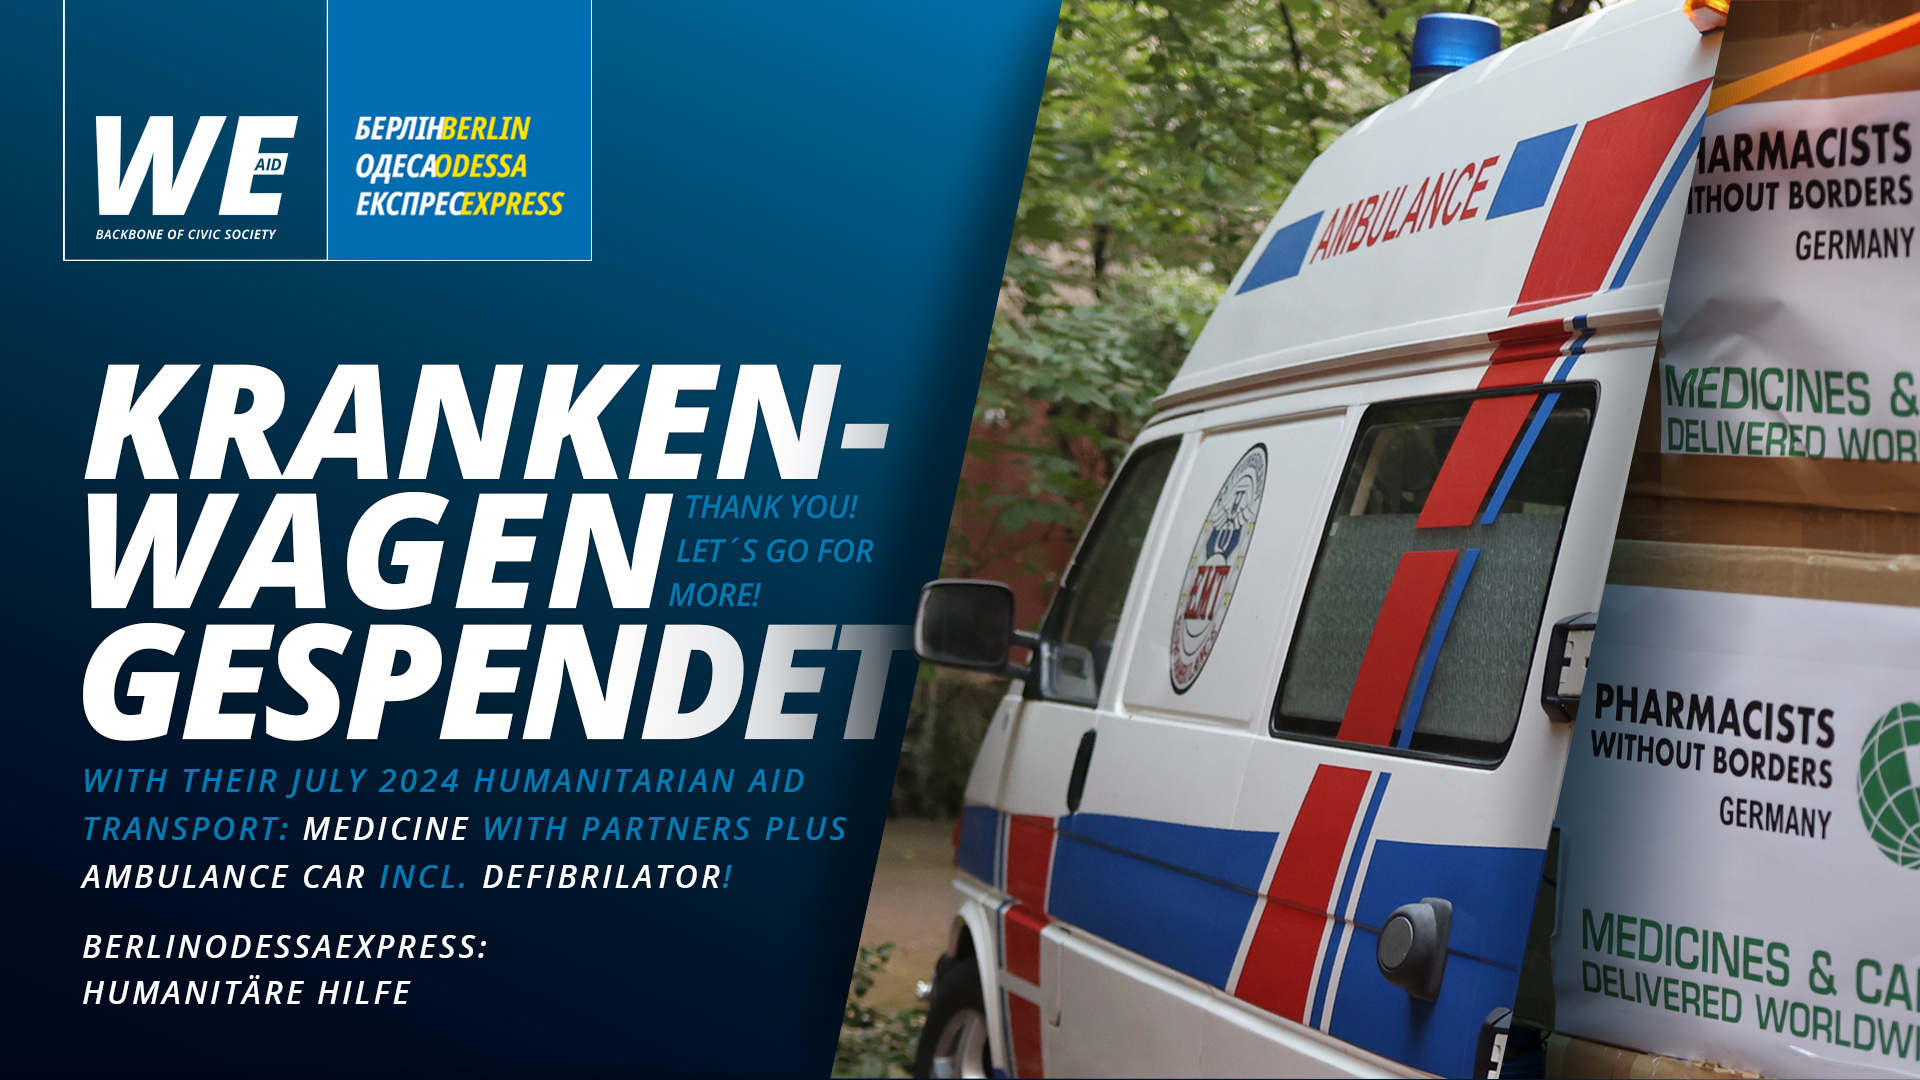 impressions of the start of the initiative BerlinOdessaExpress 10th humanitarian aid transport - they donated an ambulance car thanks to you plus with partners from 